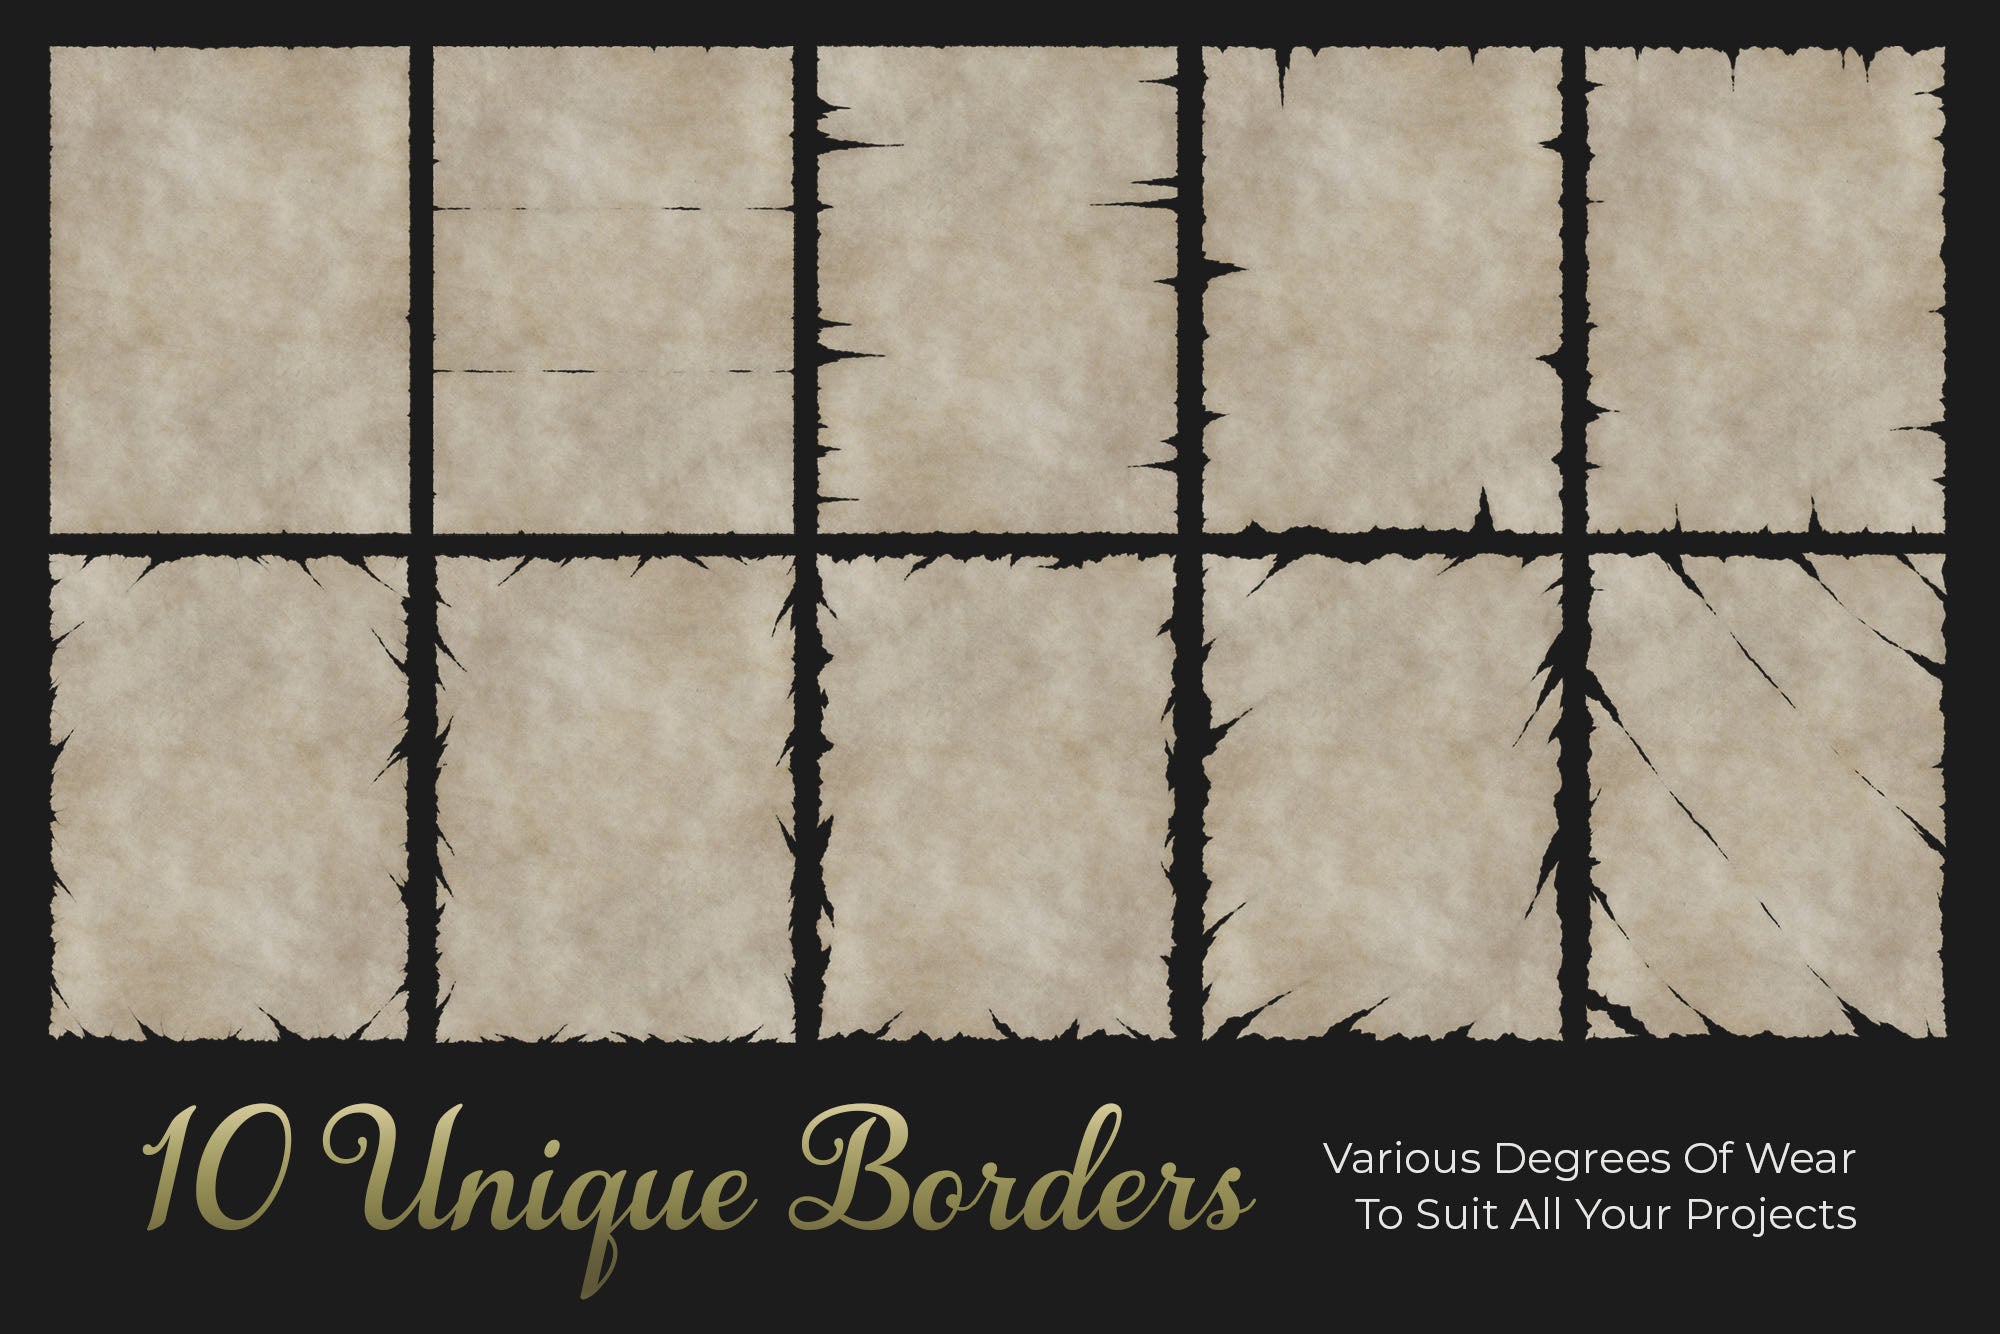 Ancient Borders - Hand Illustrated Torn Paper Borders